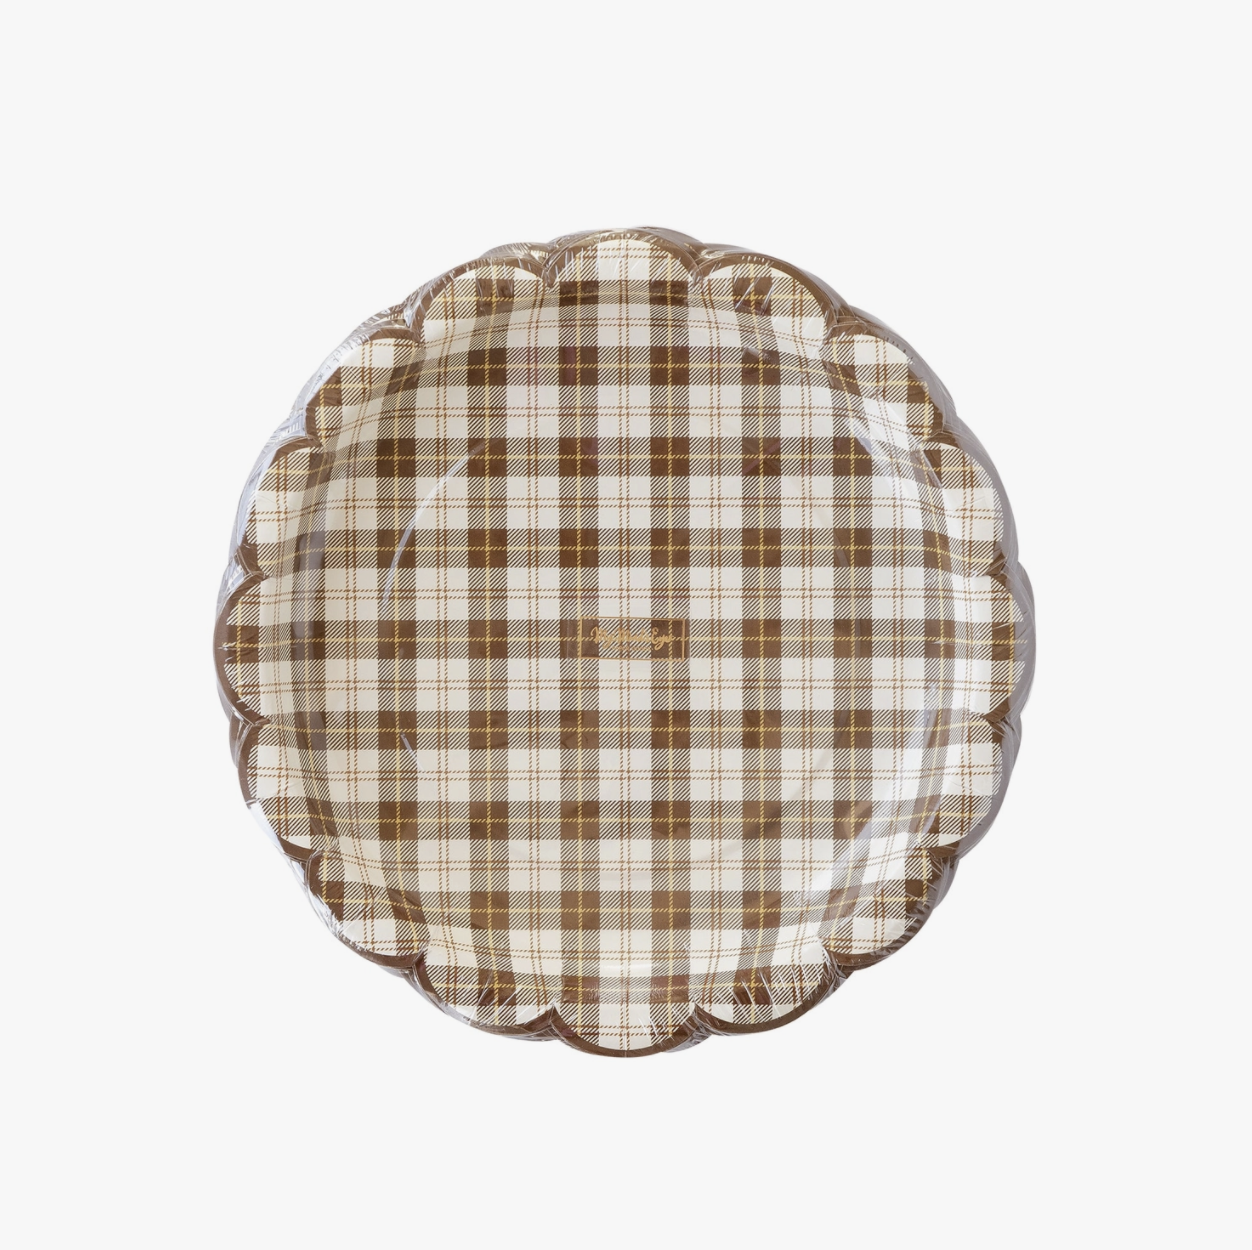 Scallop Brown Plaid Thanksgiving Paper Plate